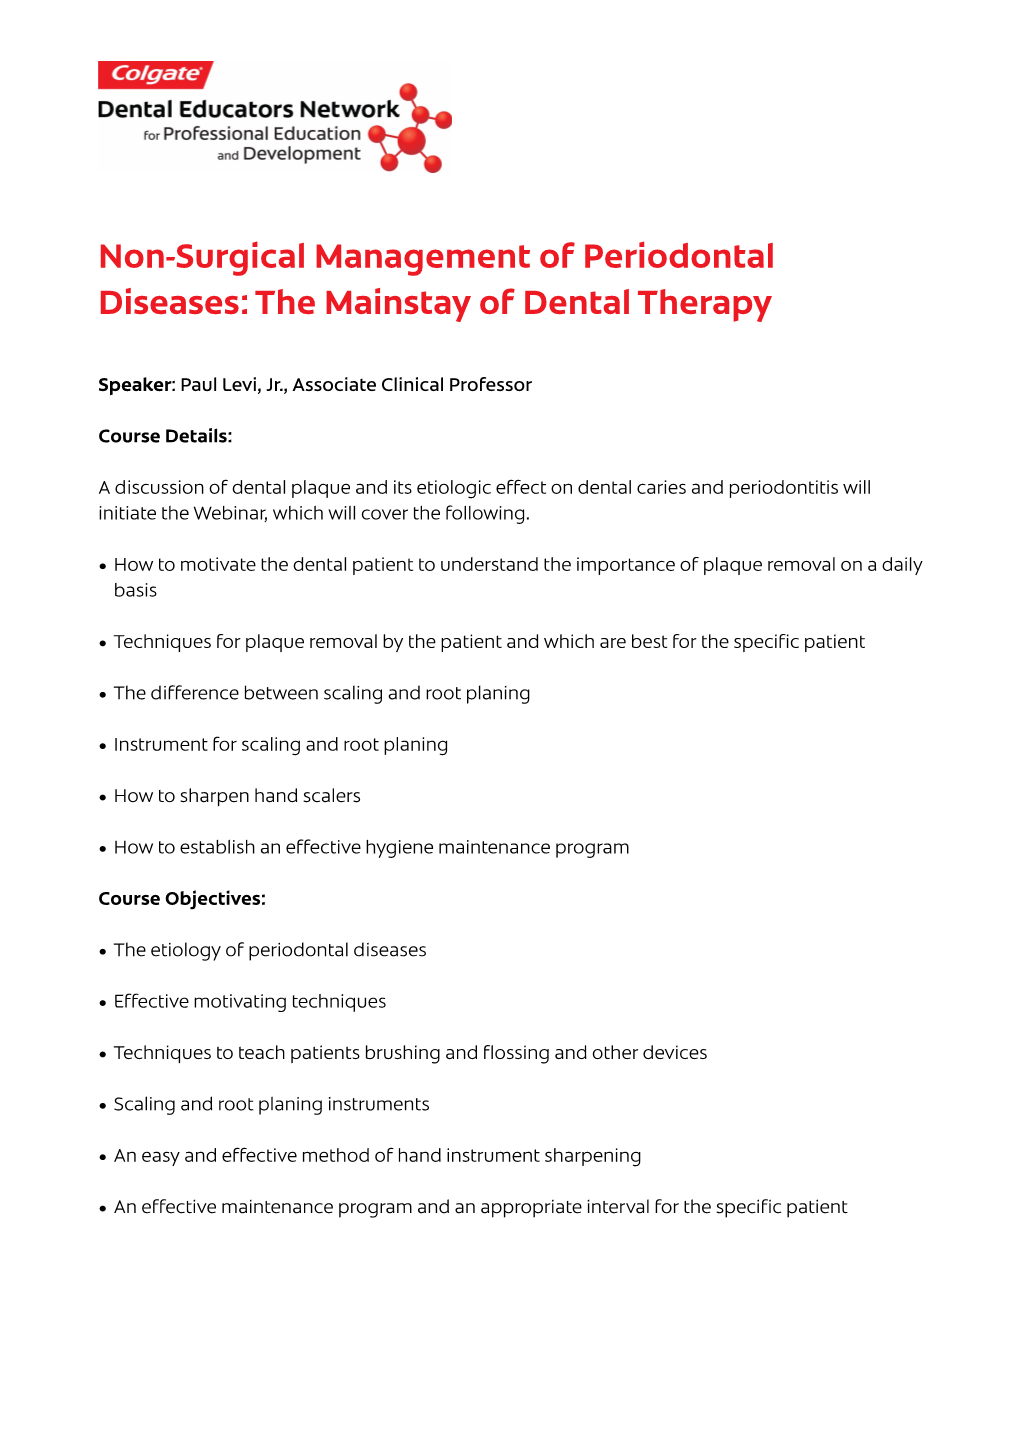 Non-Surgical Management of Periodontal Diseases: the Mainstay of Dental Therapy